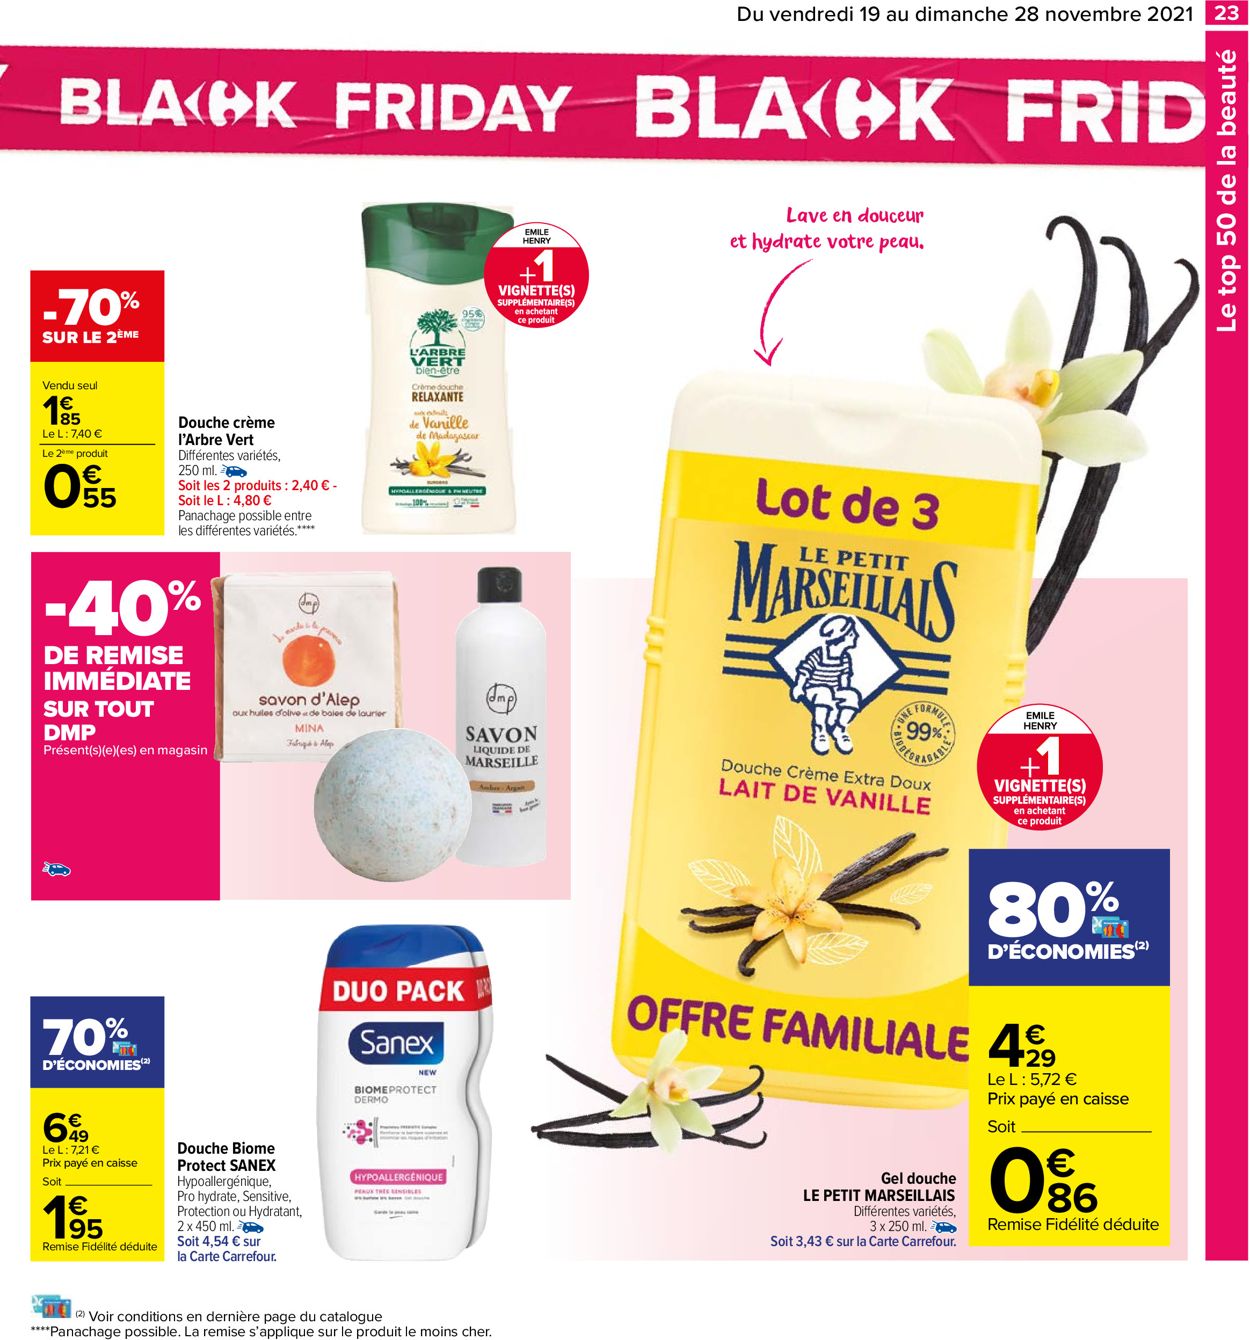 Carrefour BLACK WEEK 2021 Catalogue - 19.11-28.11.2021 (Page 23)